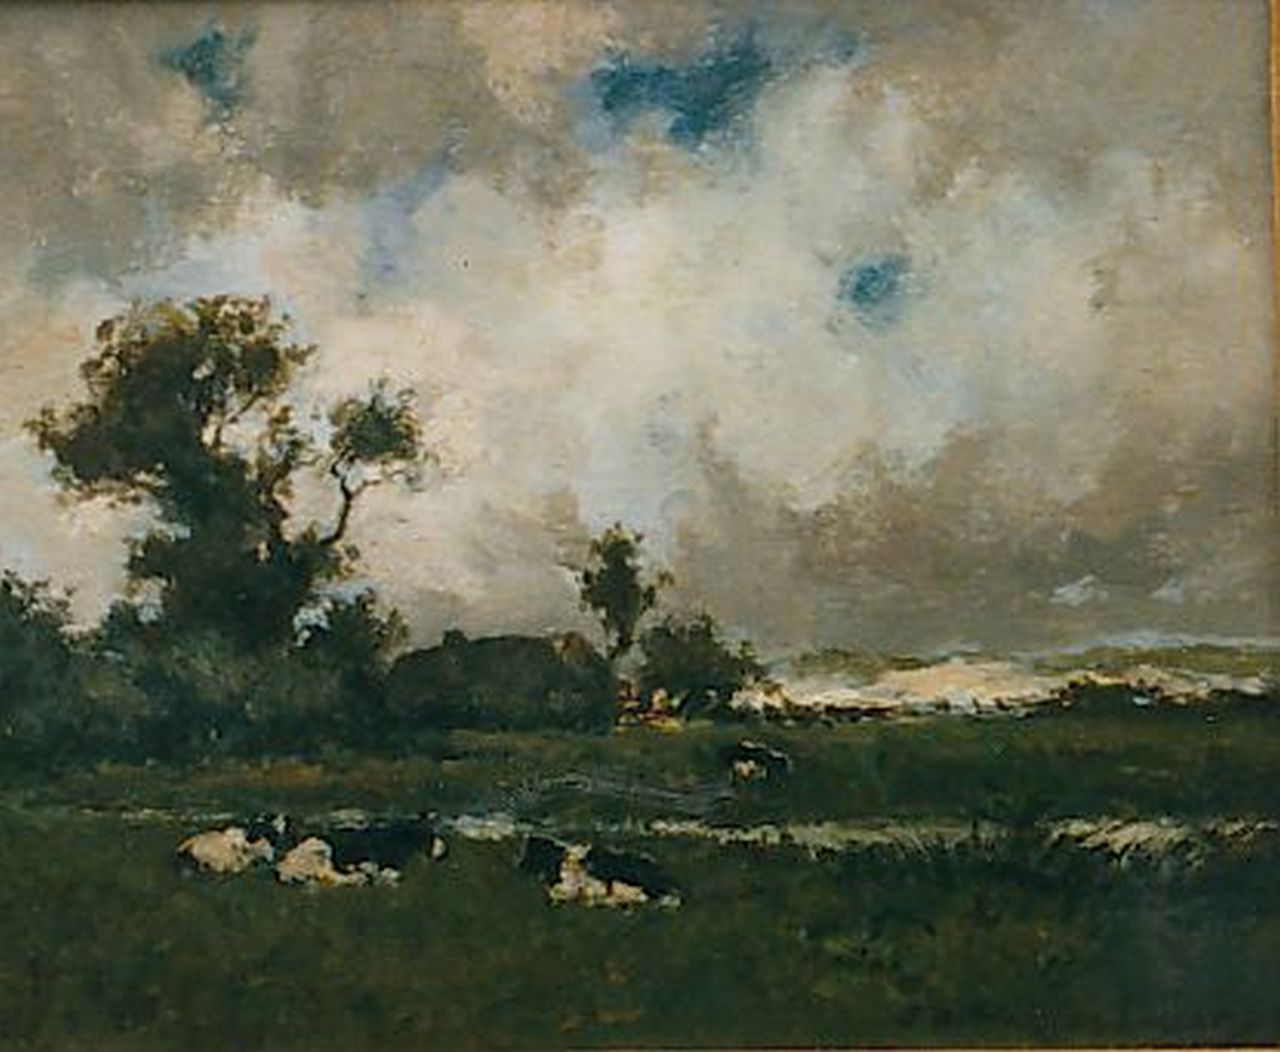 Weissenbruch H.J.  | Hendrik Johannes 'J.H.' Weissenbruch, Cows in a landscape, oil on panel 17.3 x 22.0 cm, signed l.r.